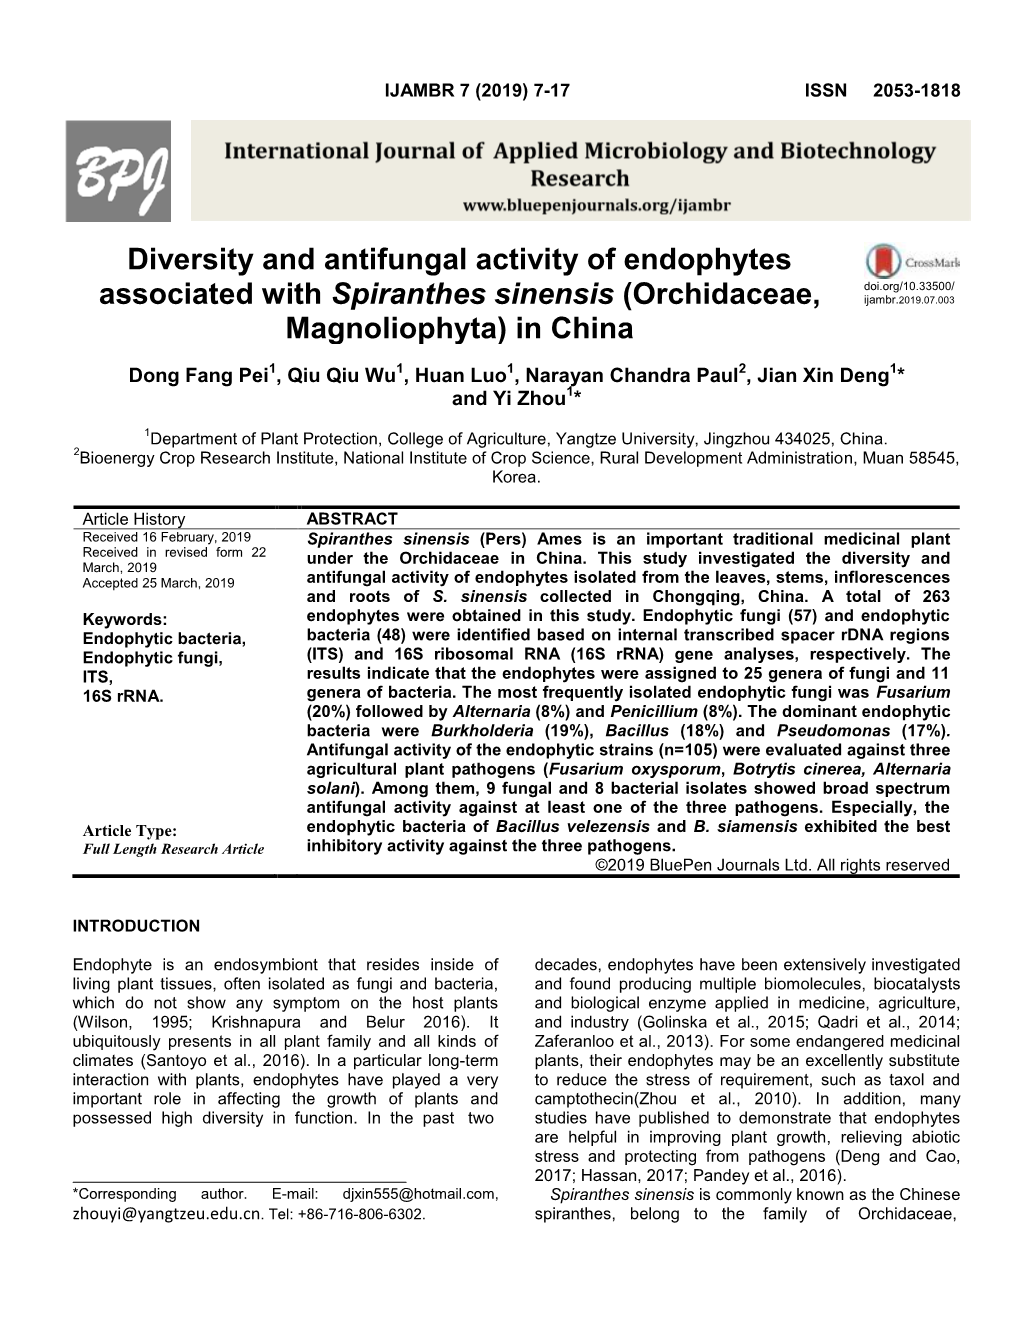 Diversity and Antifungal Activity of Endophytes Associated With